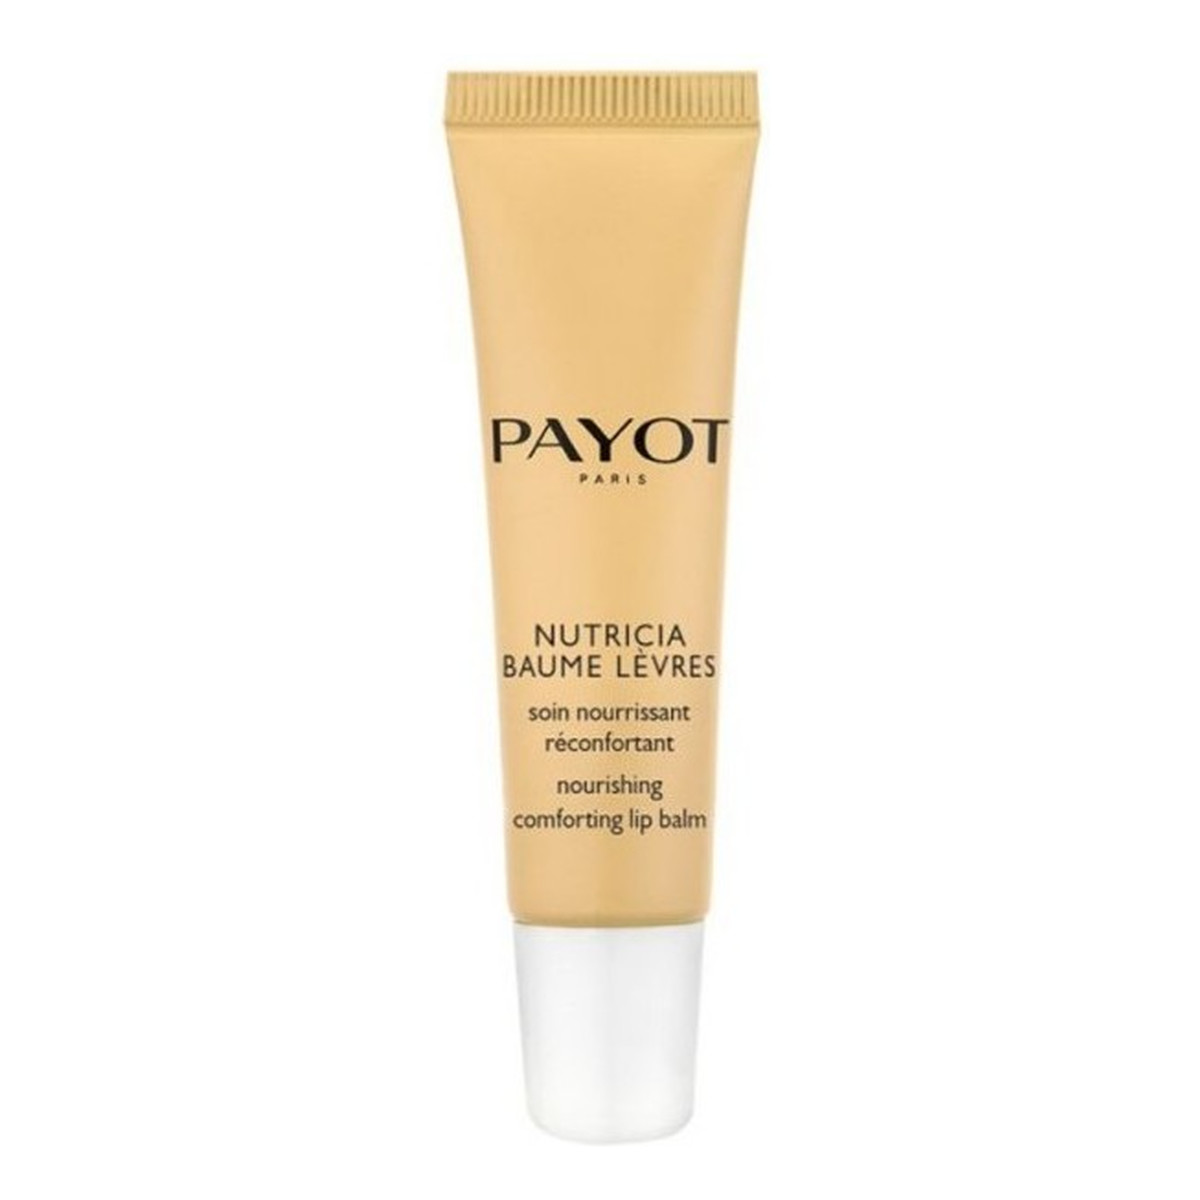 Payot Nutricia Baume Levres Nourishing Comforting Lip Balm Odżywczy balsam do ust 15ml